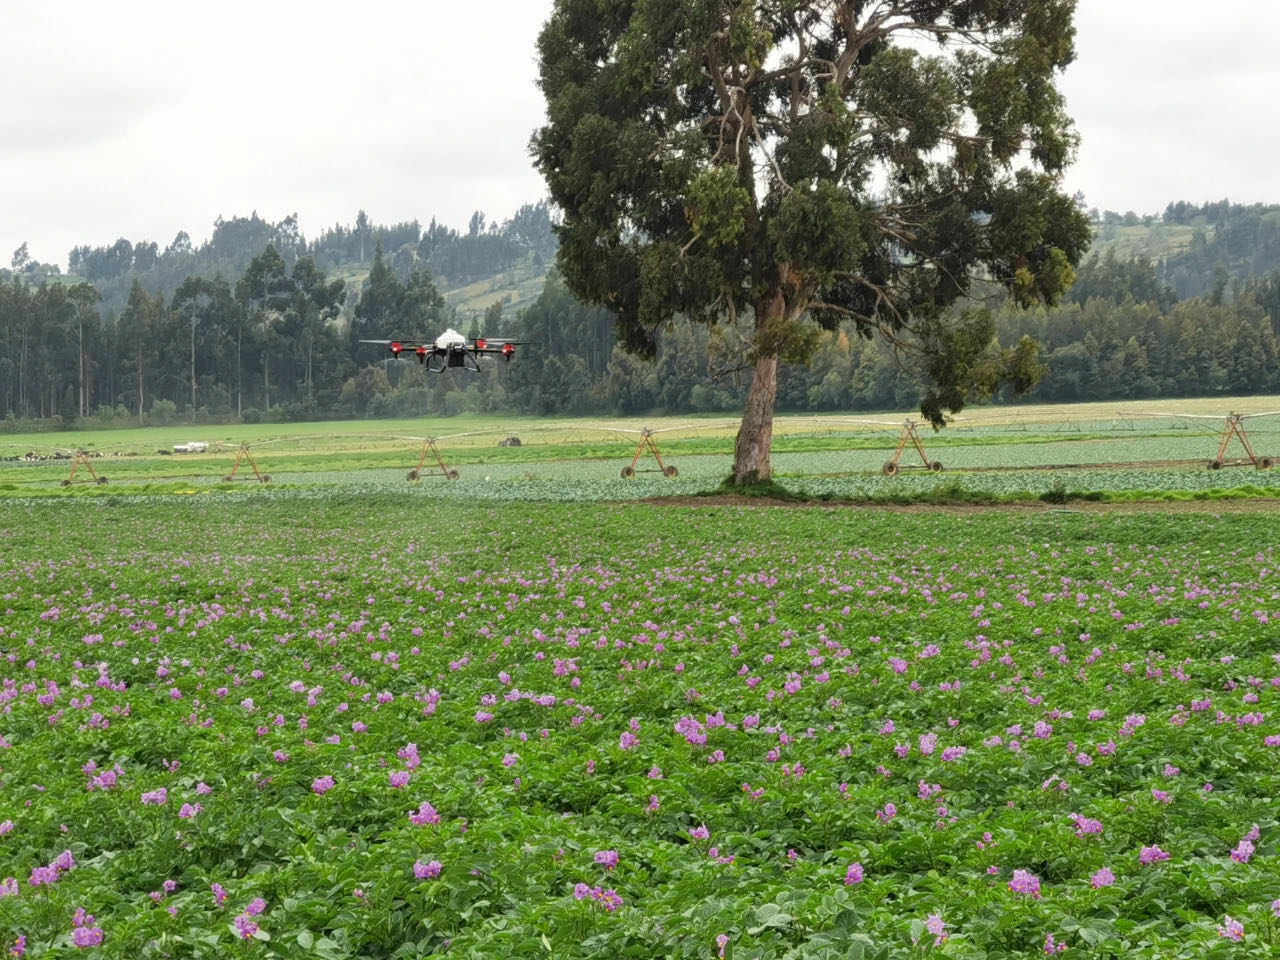 XAG drone spraying on potatoes in Andes vegetable base (source: MegaDrone SA)